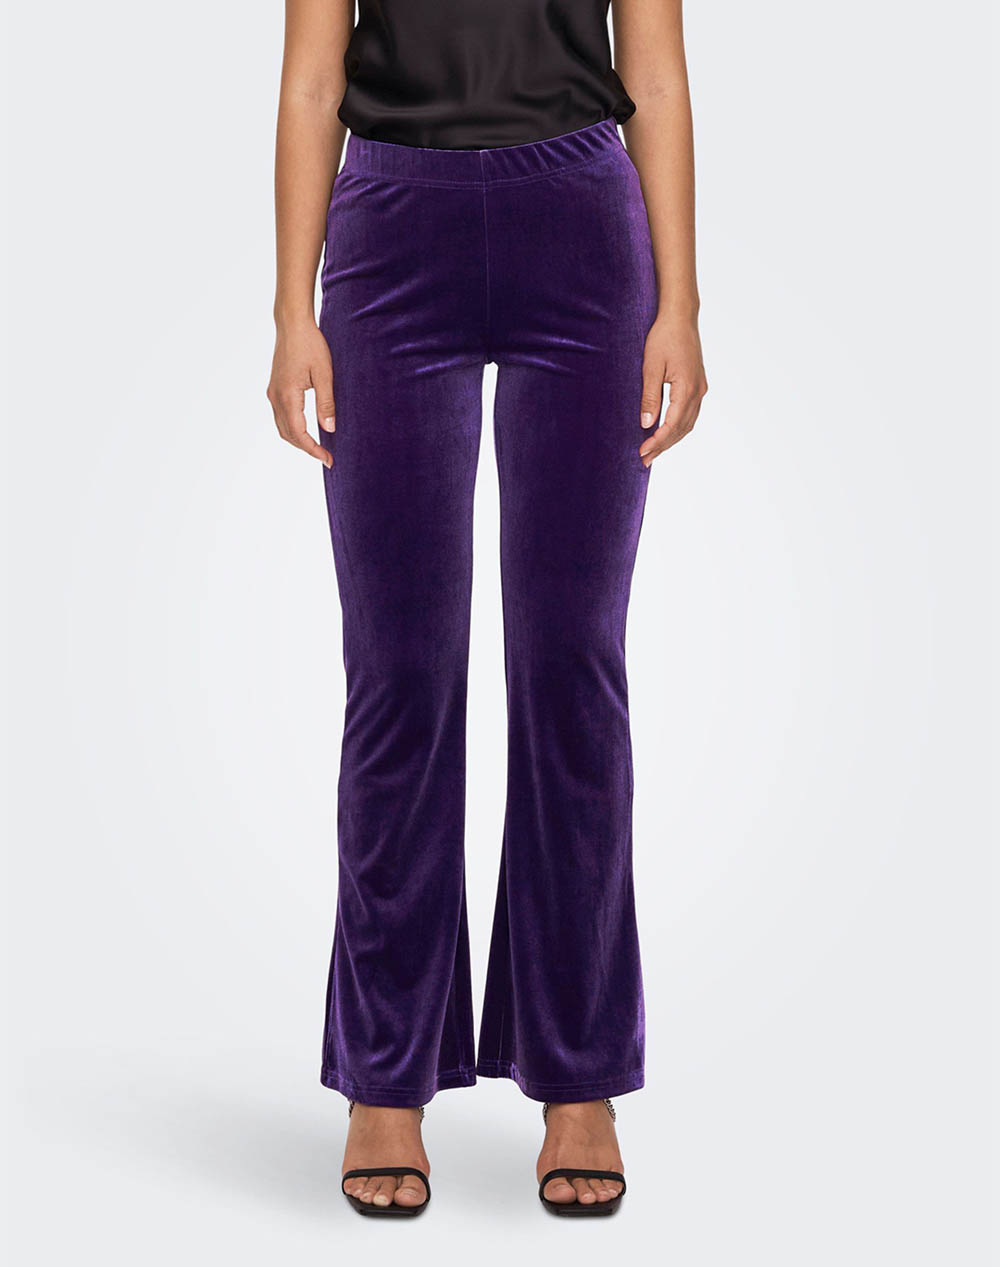 ONLY ONLSMOOTH VELVET PANTS JRS 15277995-Acai Purple 3510AONLY2010109_XR16736